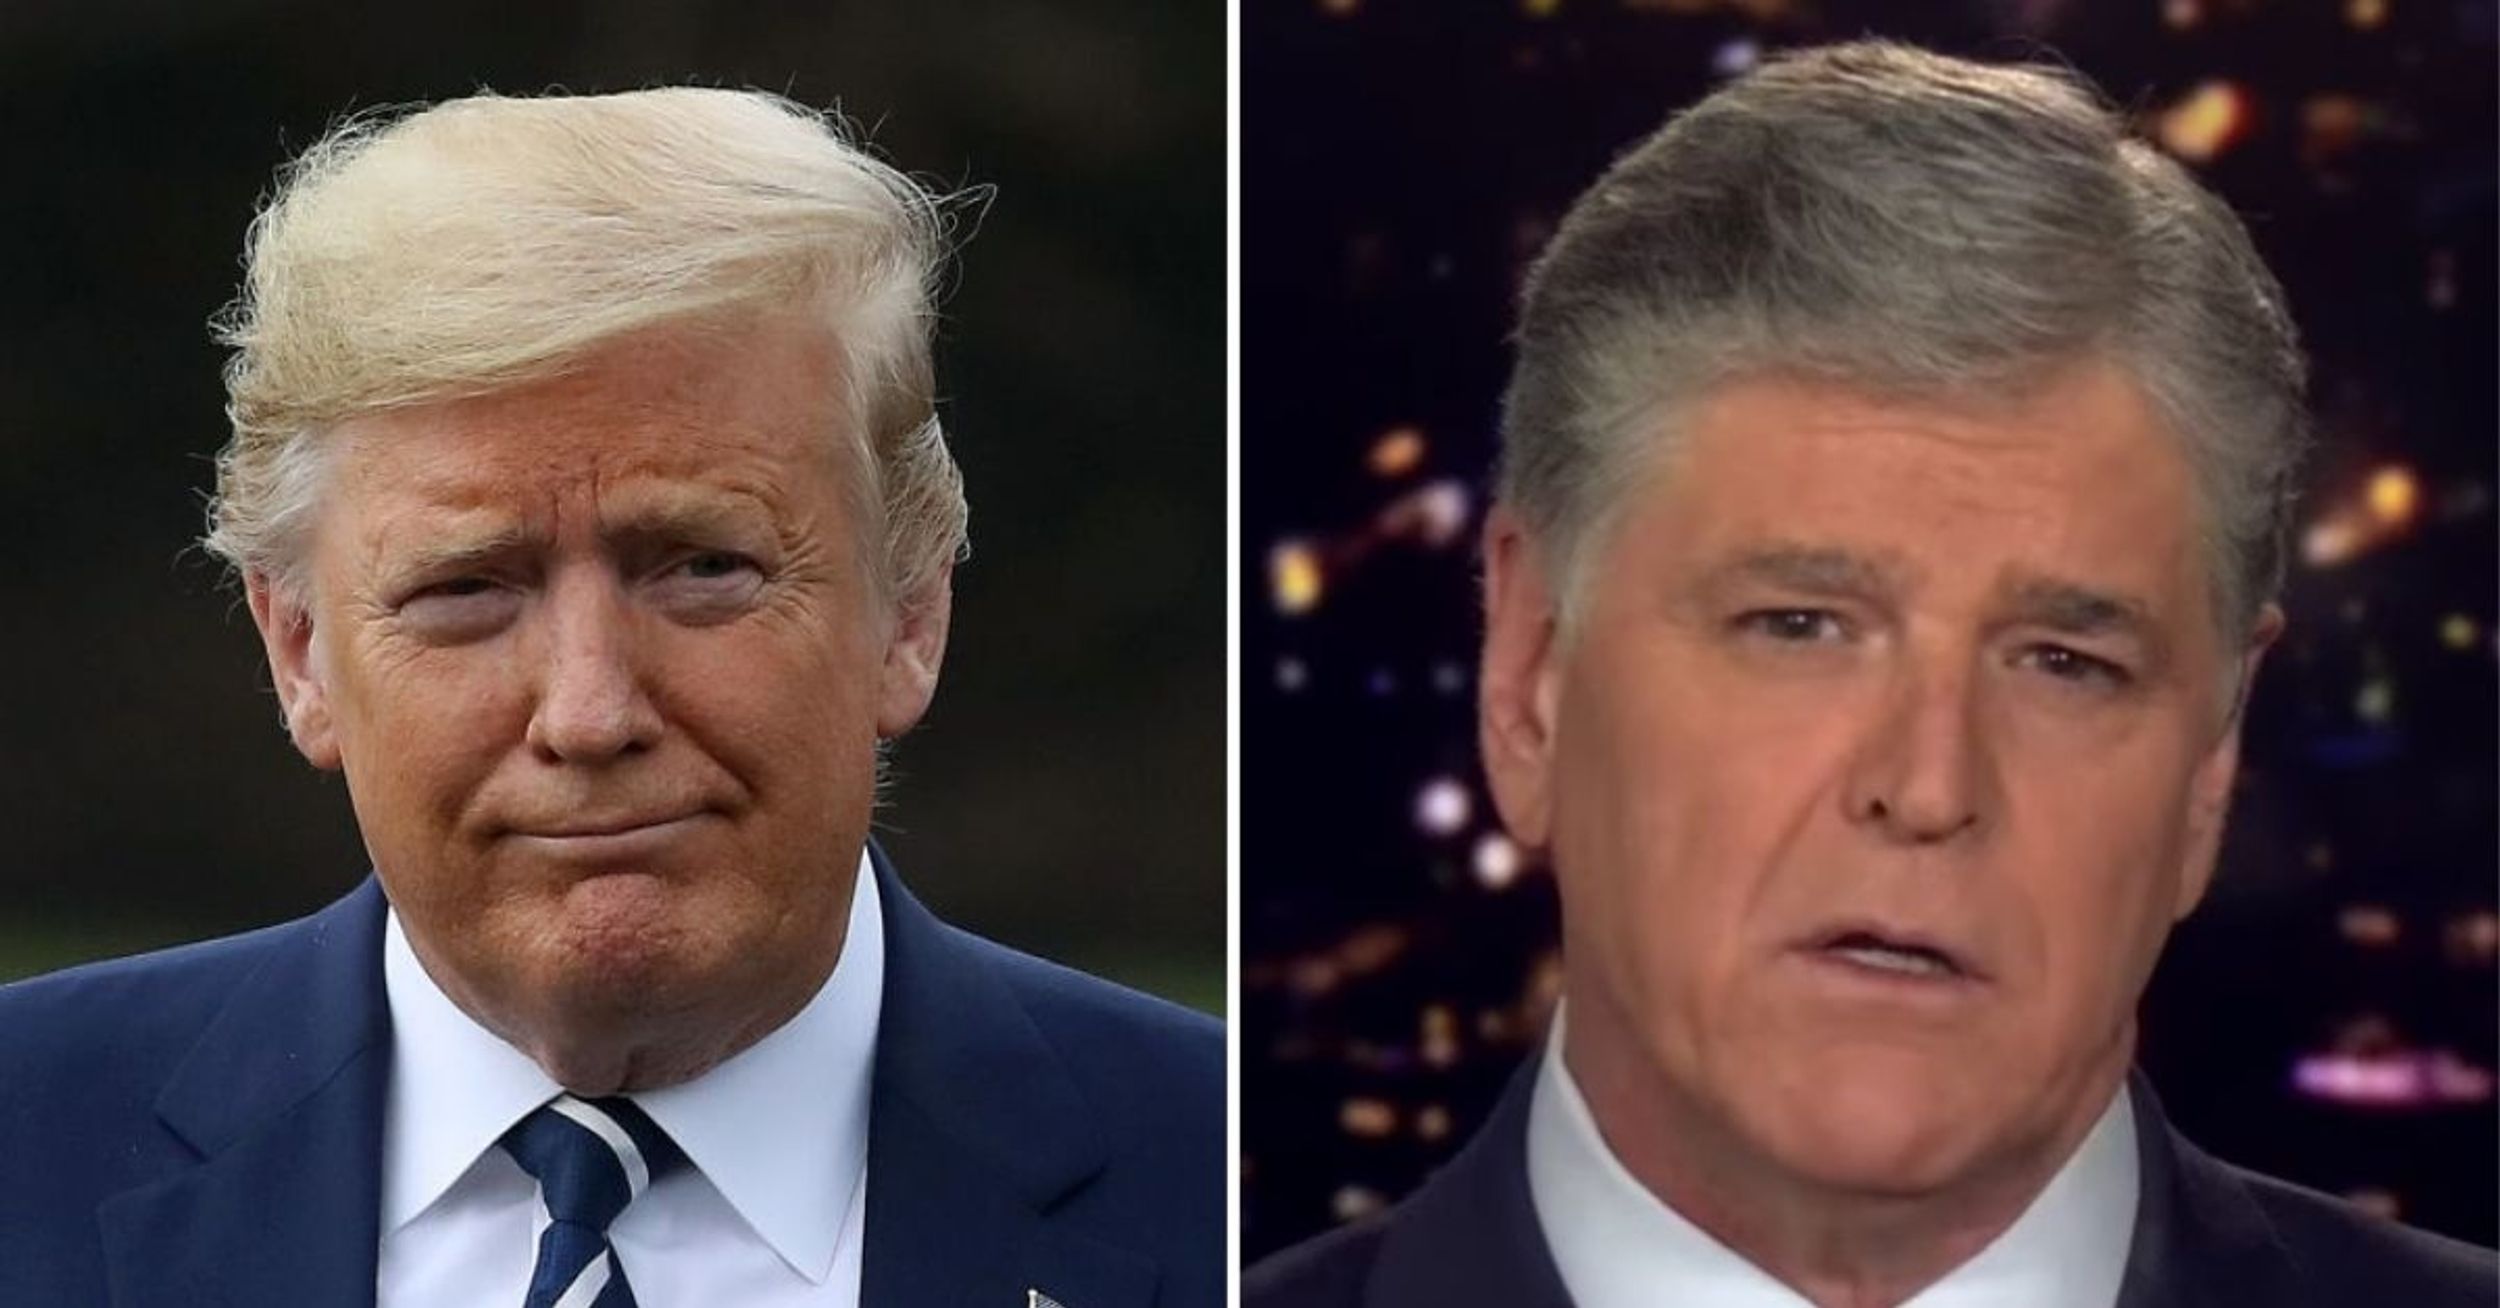 Trump Went On Fox News To Complain About How Their Guests Say 'Very, Very False Things'—And The Irony Is Rich